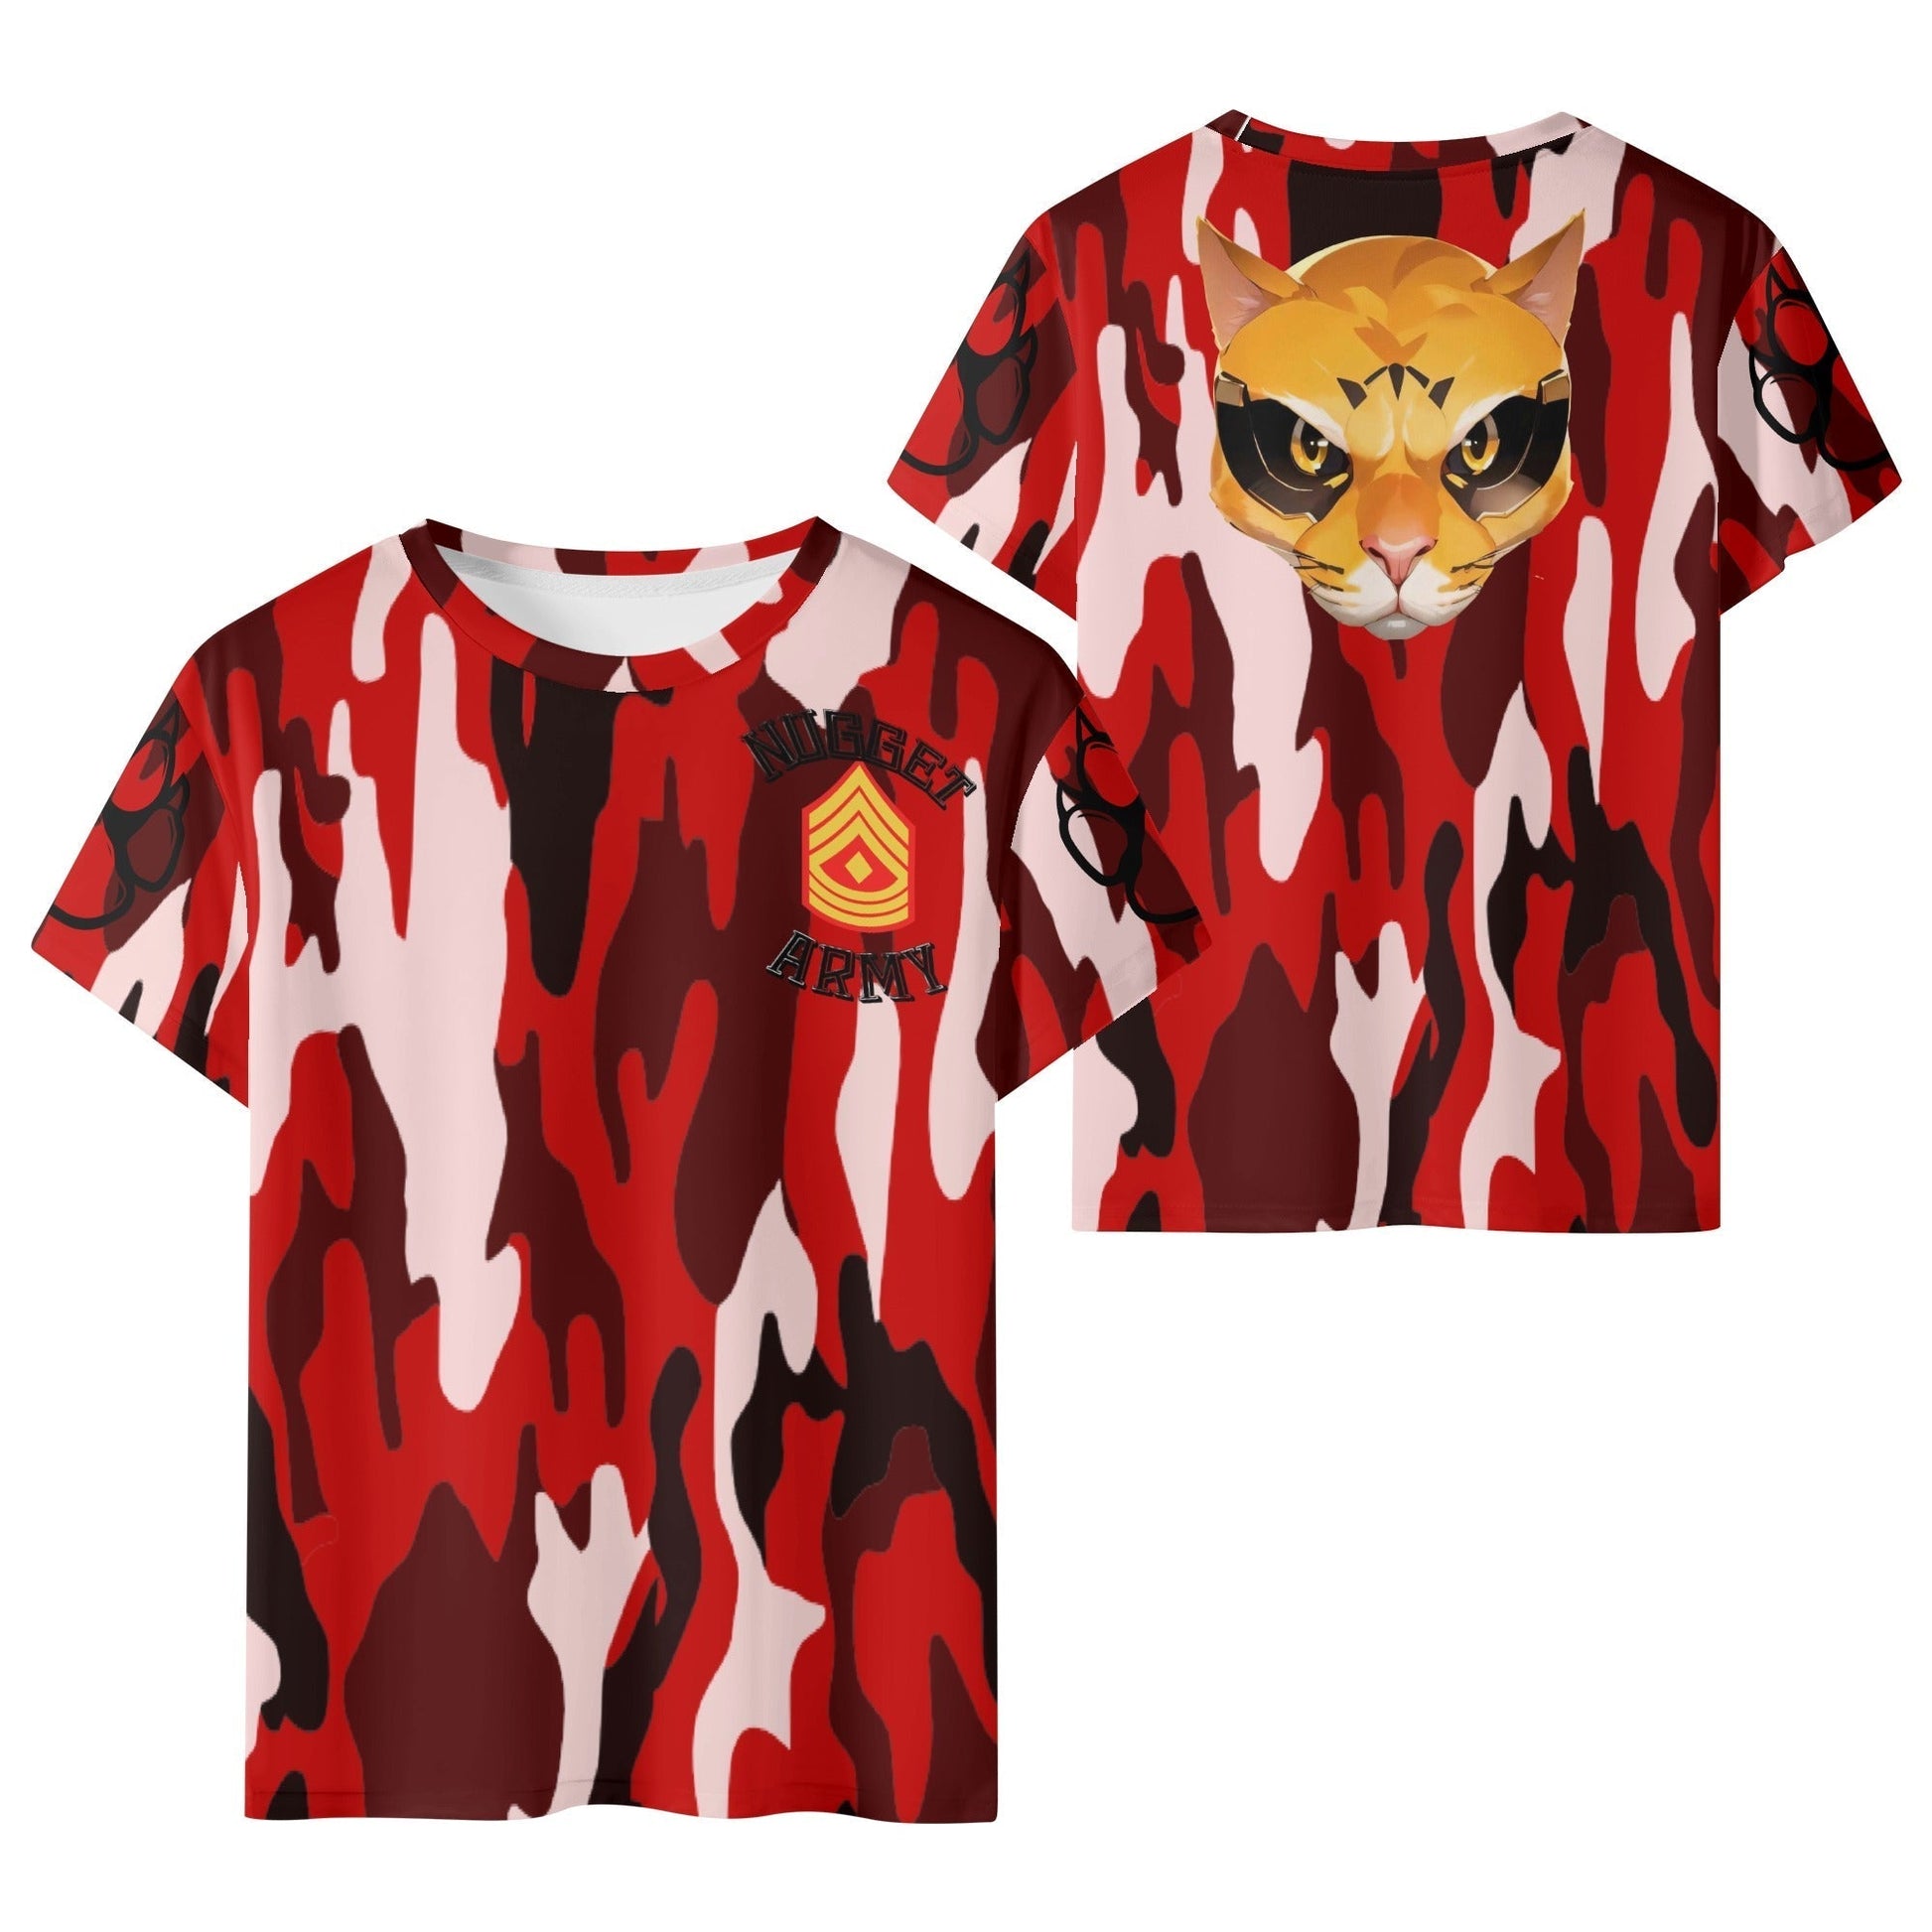 Stand out  with the  Nugget Army Kids Short Sleeve T-Shirt  available at Hey Nugget. Grab yours today!